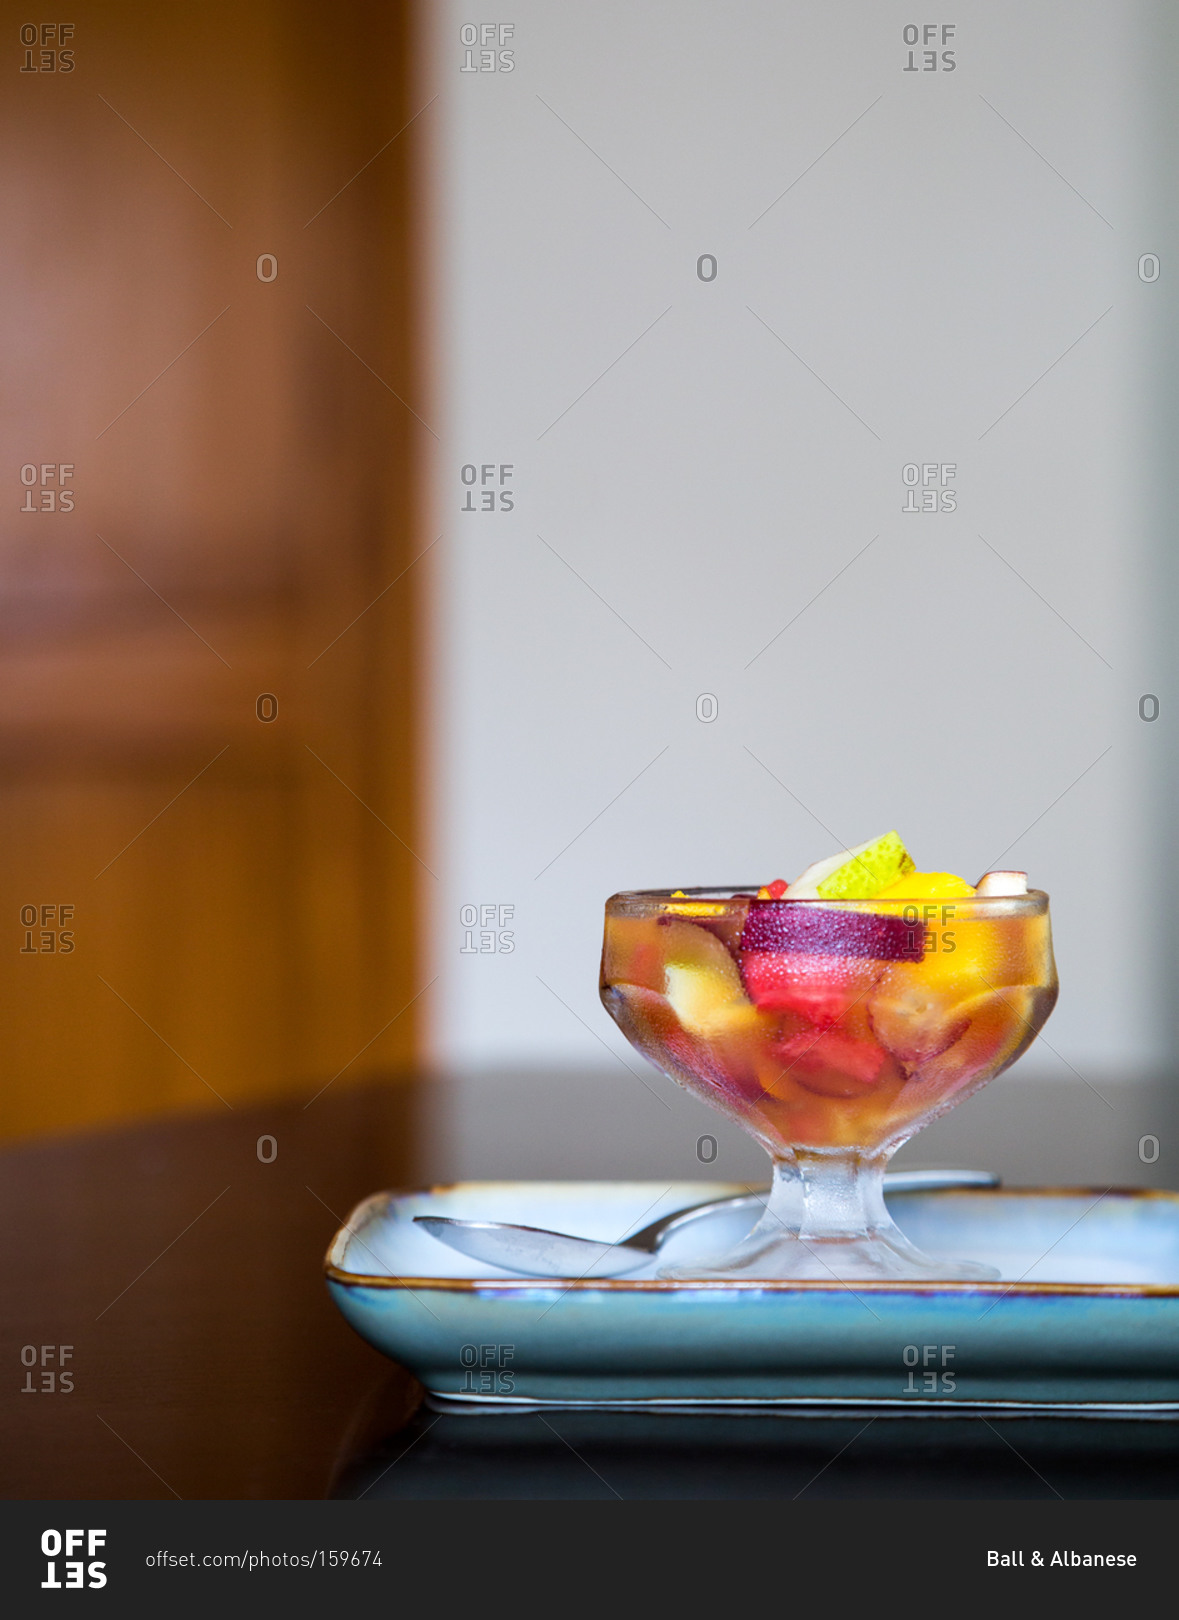 Fruit compote in dessert cup